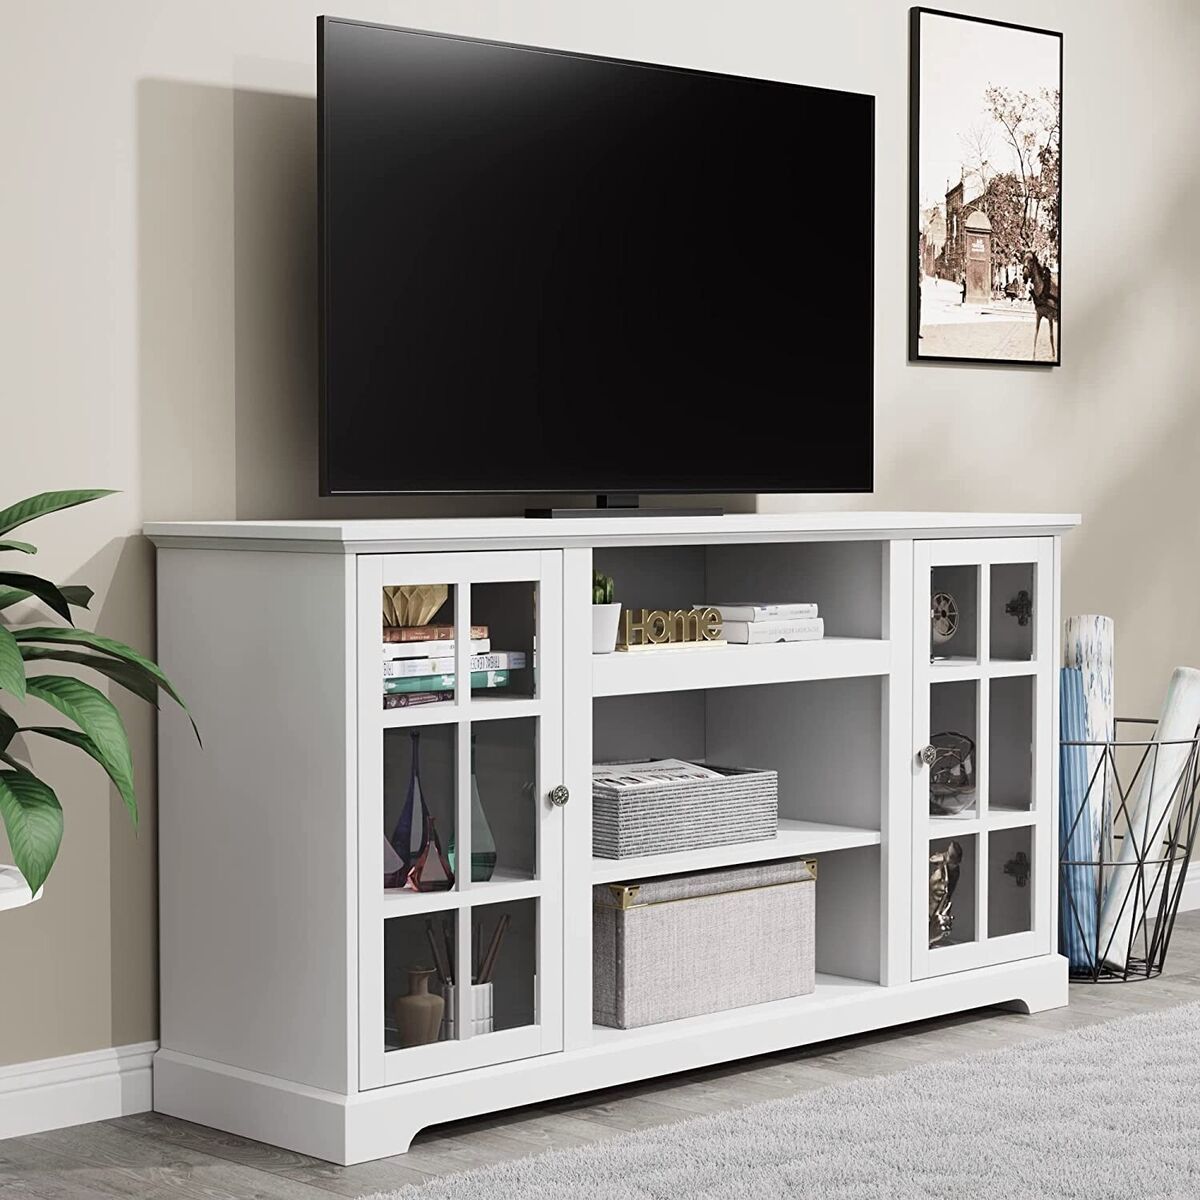 58" Tv Stand Cabinet For Tv's Up To 65" Entertainment Center W/storage  Shelves | Ebay Intended For Entertainment Center With Storage Cabinet (View 3 of 15)